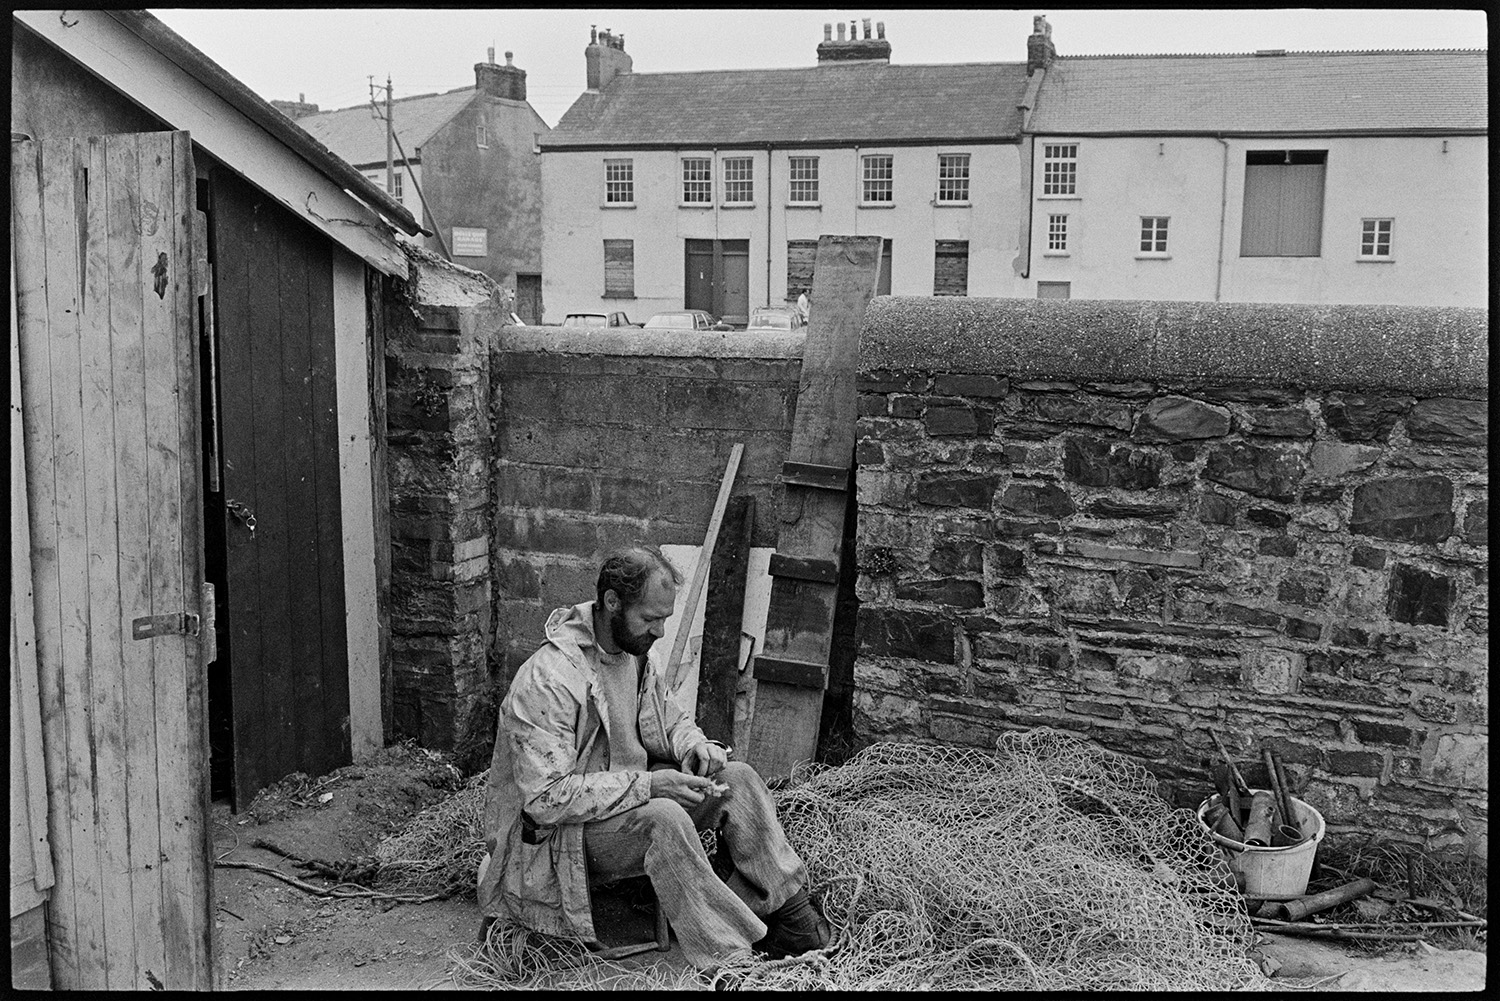 Fisherman mending nets on quay. 
[A fisherman mending his nets by a shed and stone wall on Rolle Quay, Barnstaple.]